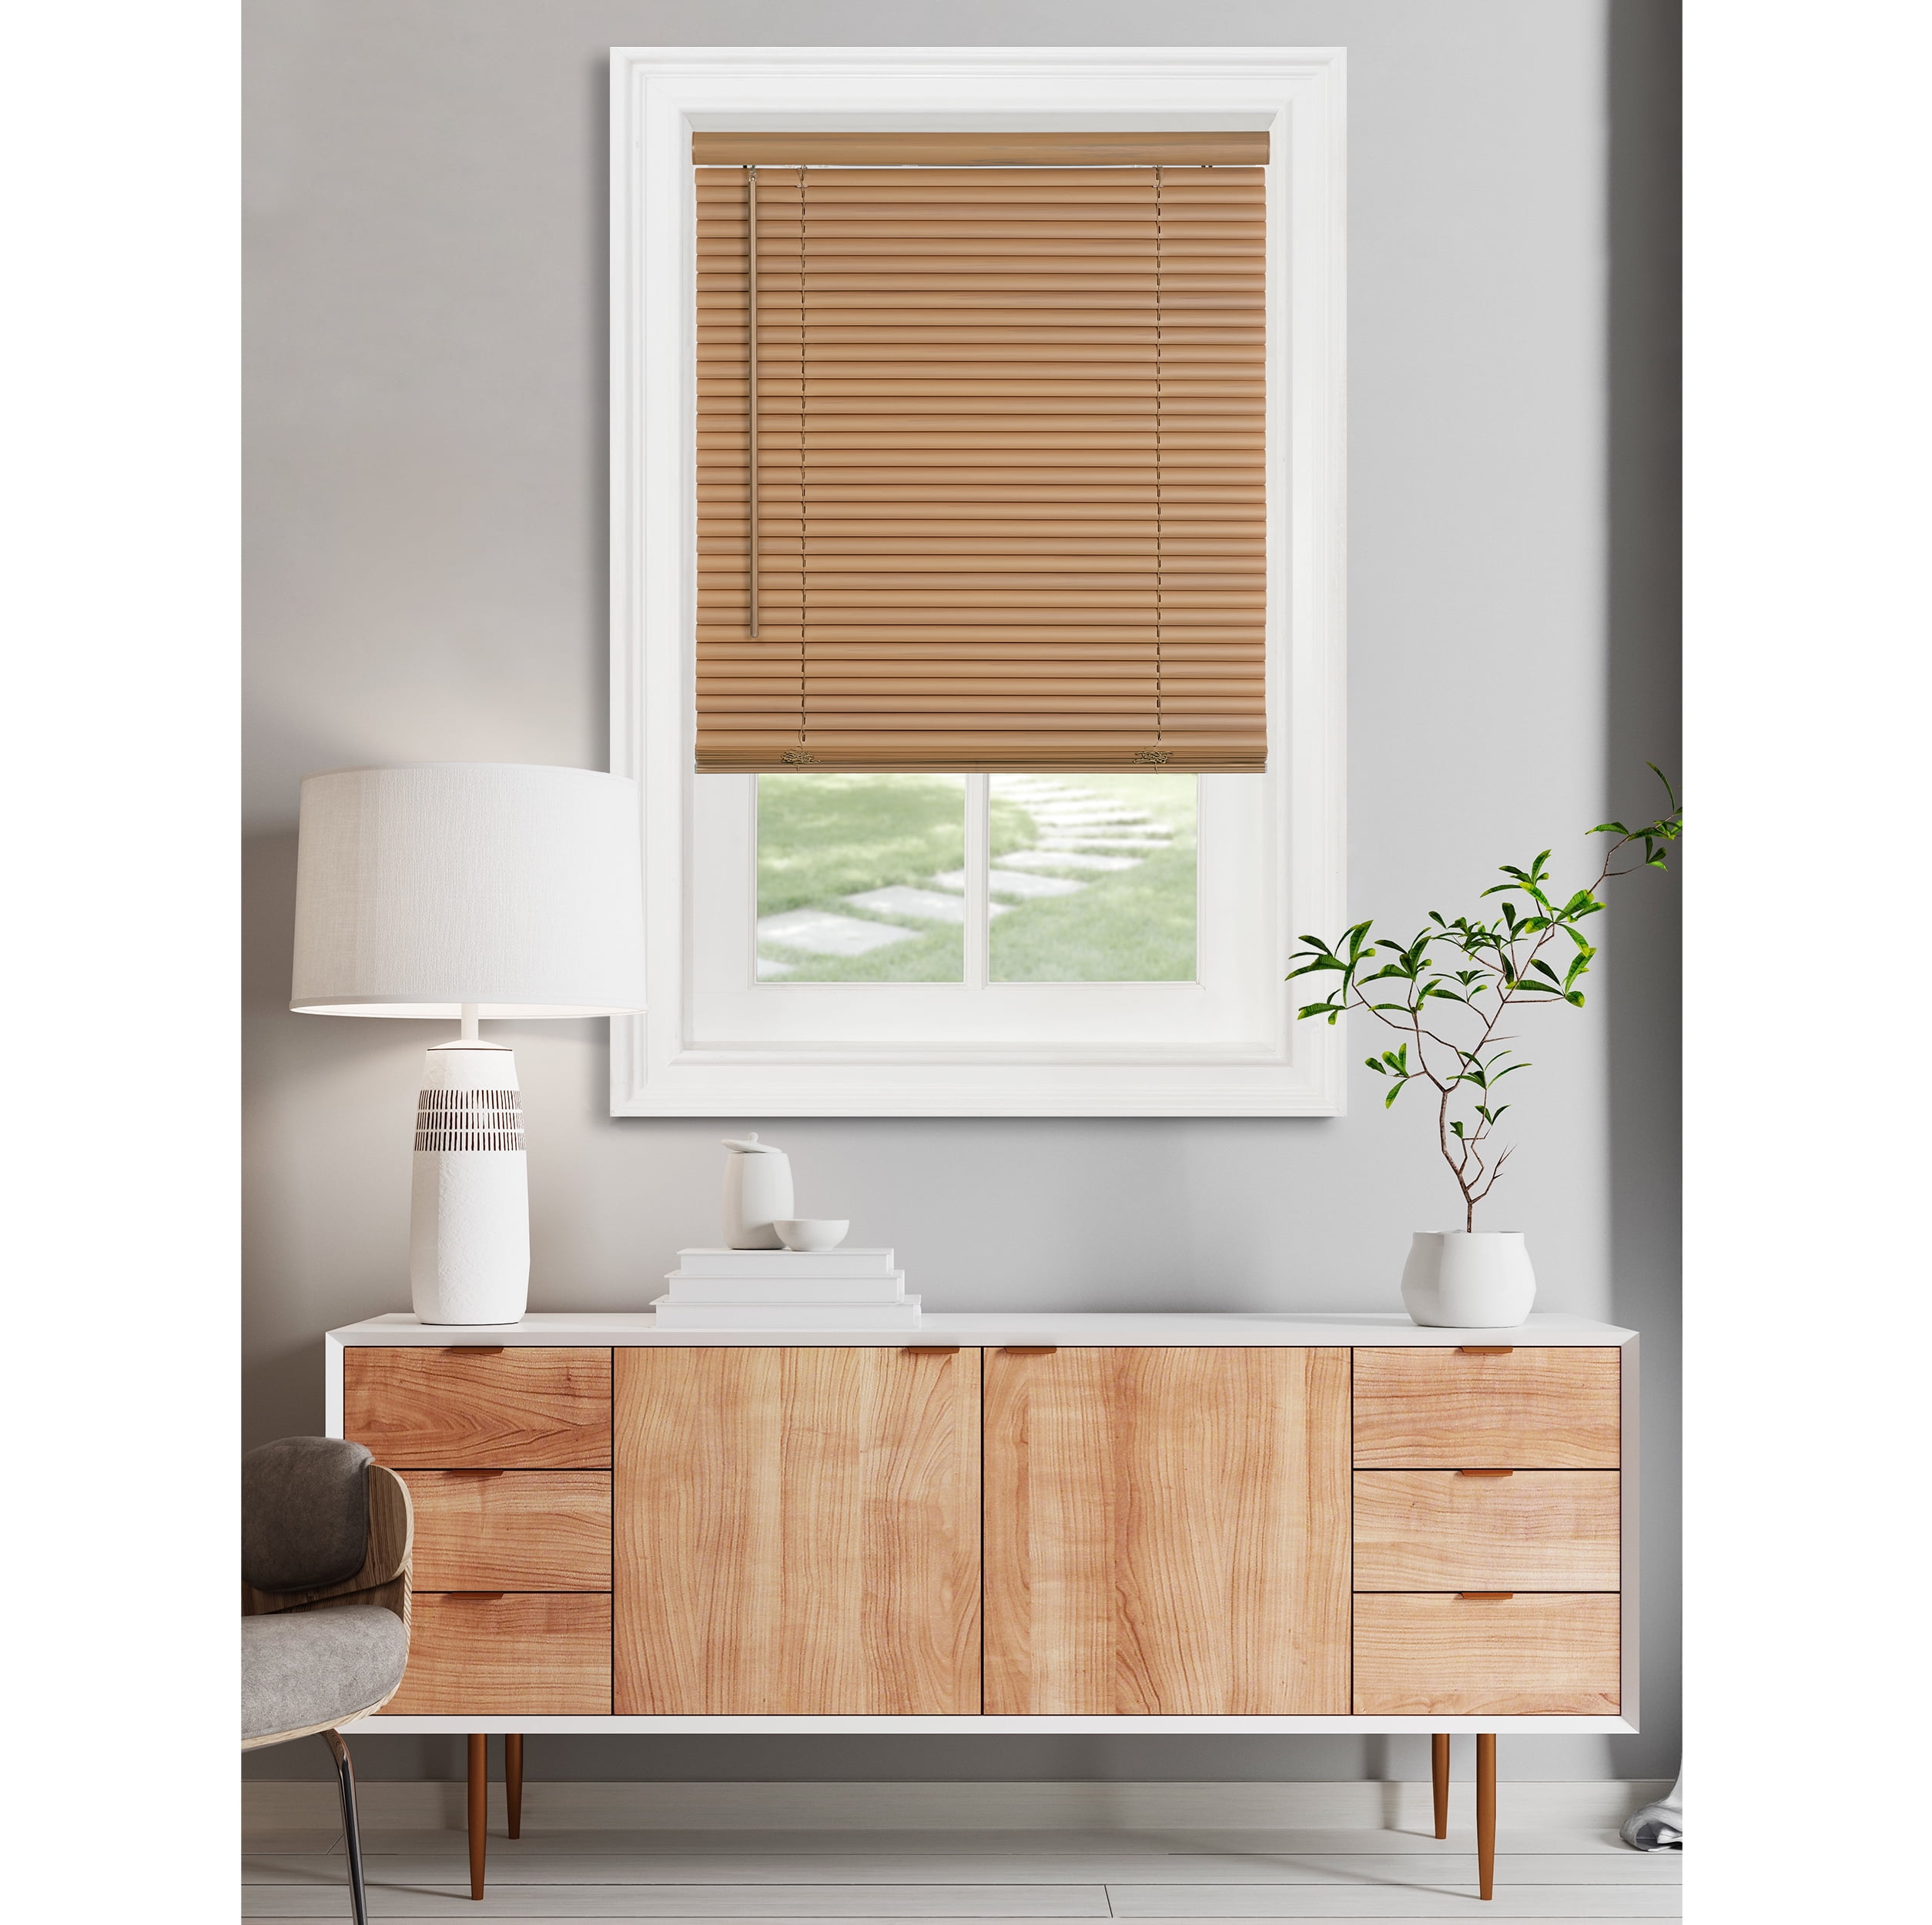 Picture of Achim MSG231WD06 Cordless GII Morningstar 1 in. Light Filtering Mini - Blind 31 x 64 in. - Woodtone